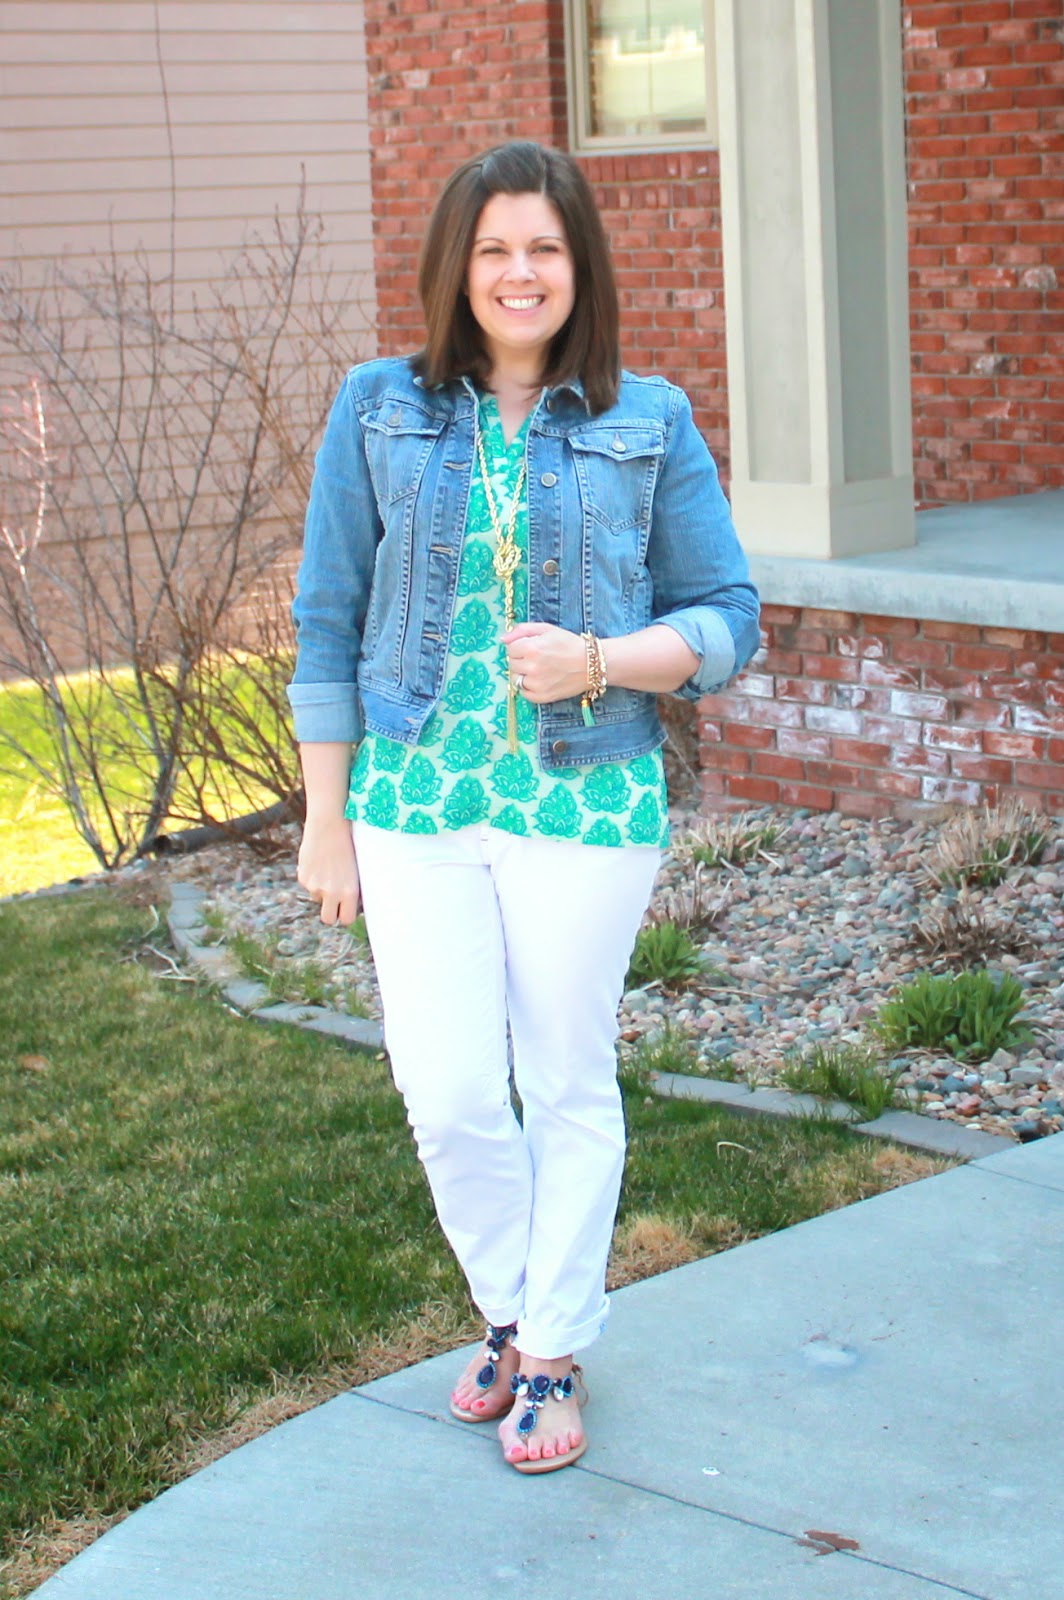 My New Favorite Outfit: Survey Results and Spring Style